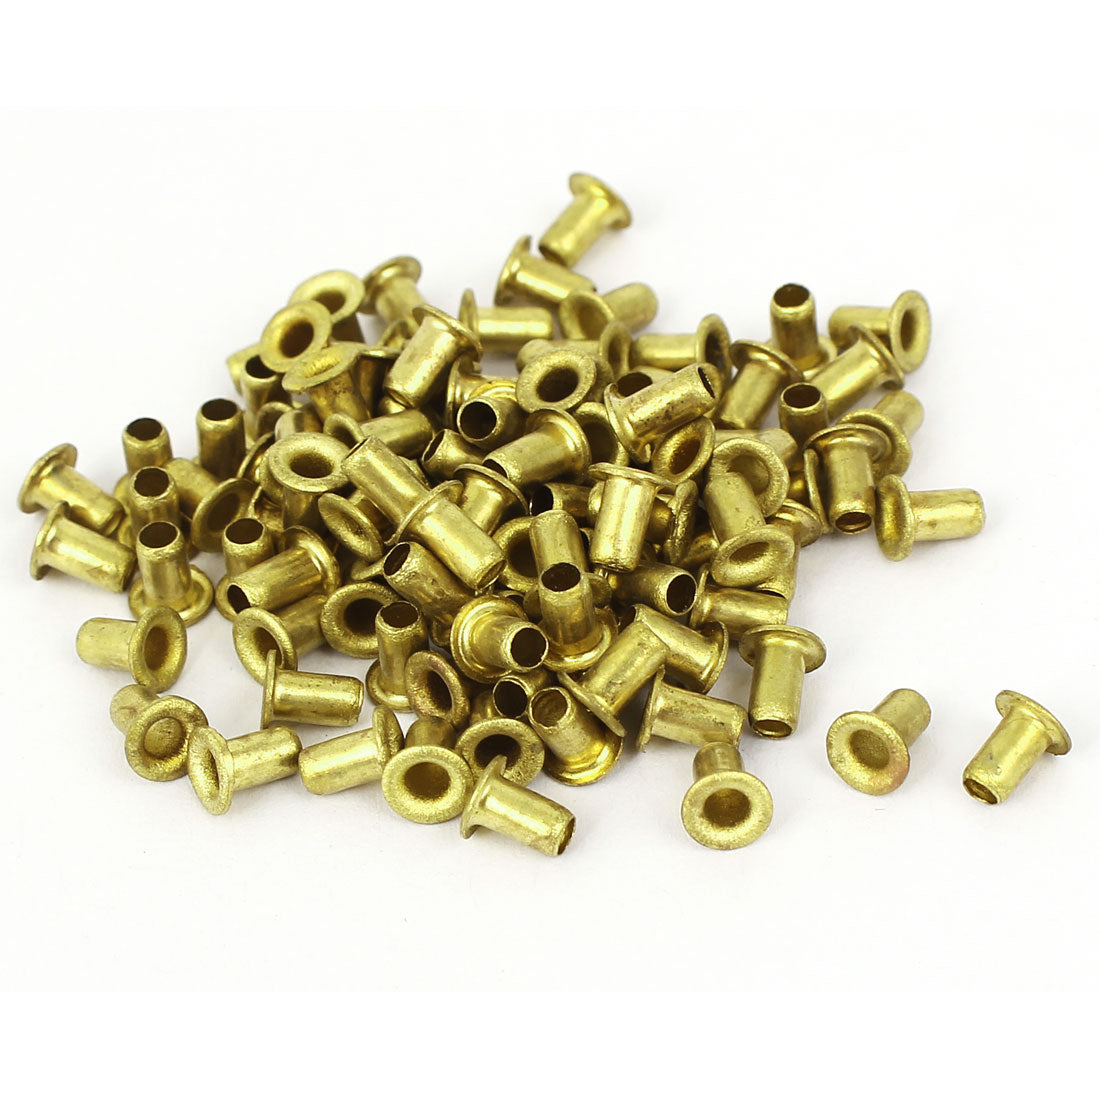 uxcell Uxcell 3mm x 5mm Through Hole Rivets Hollow Grommets PCB Circuit Board 100pcs